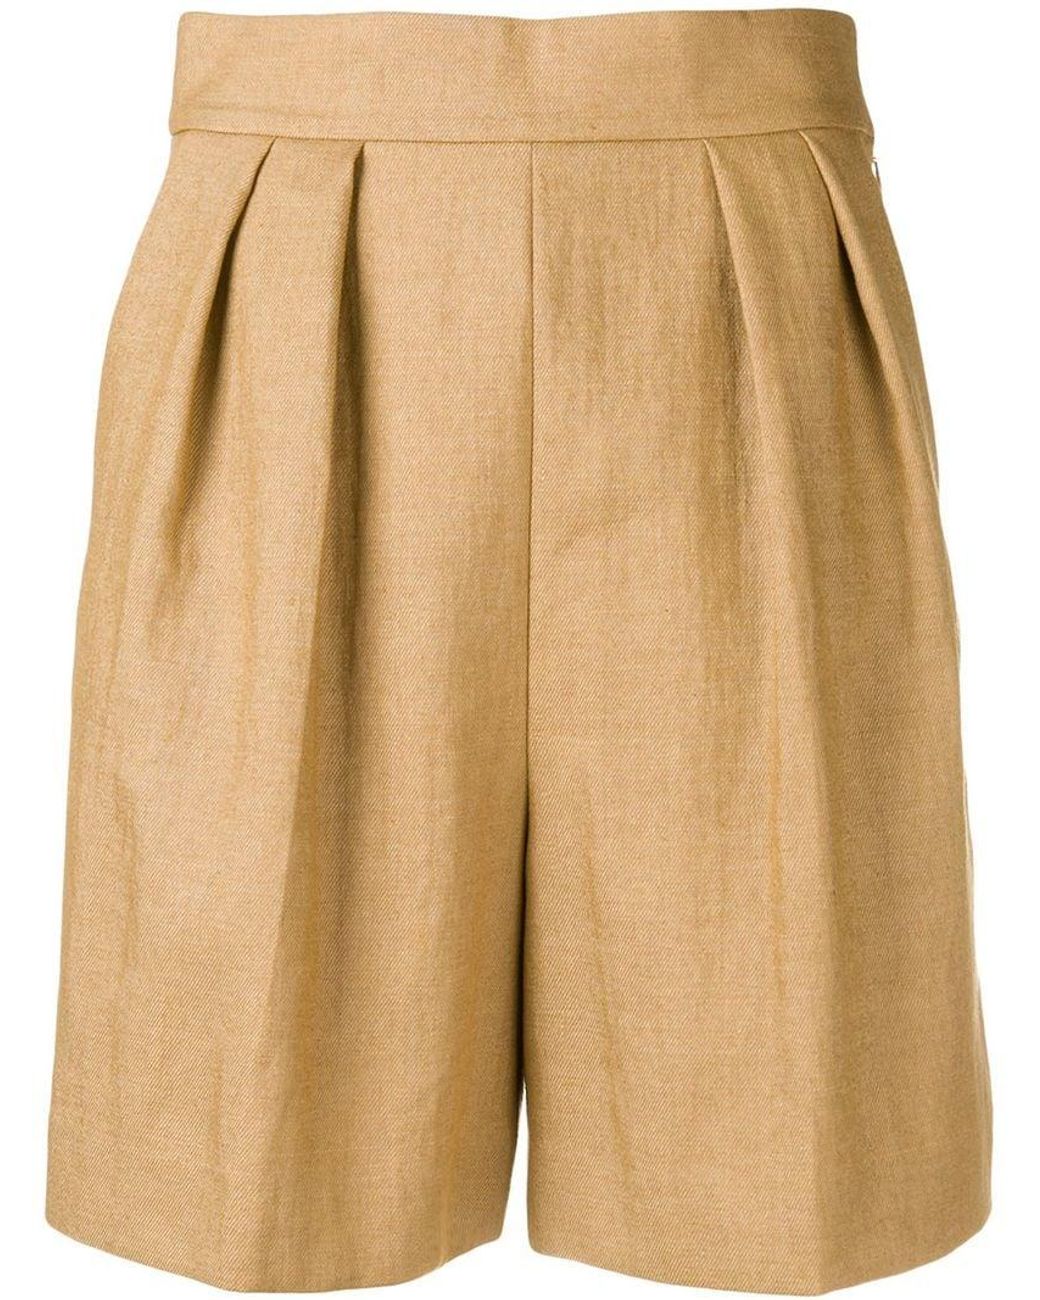 Lyst - Theory Tapered Shorts in Brown